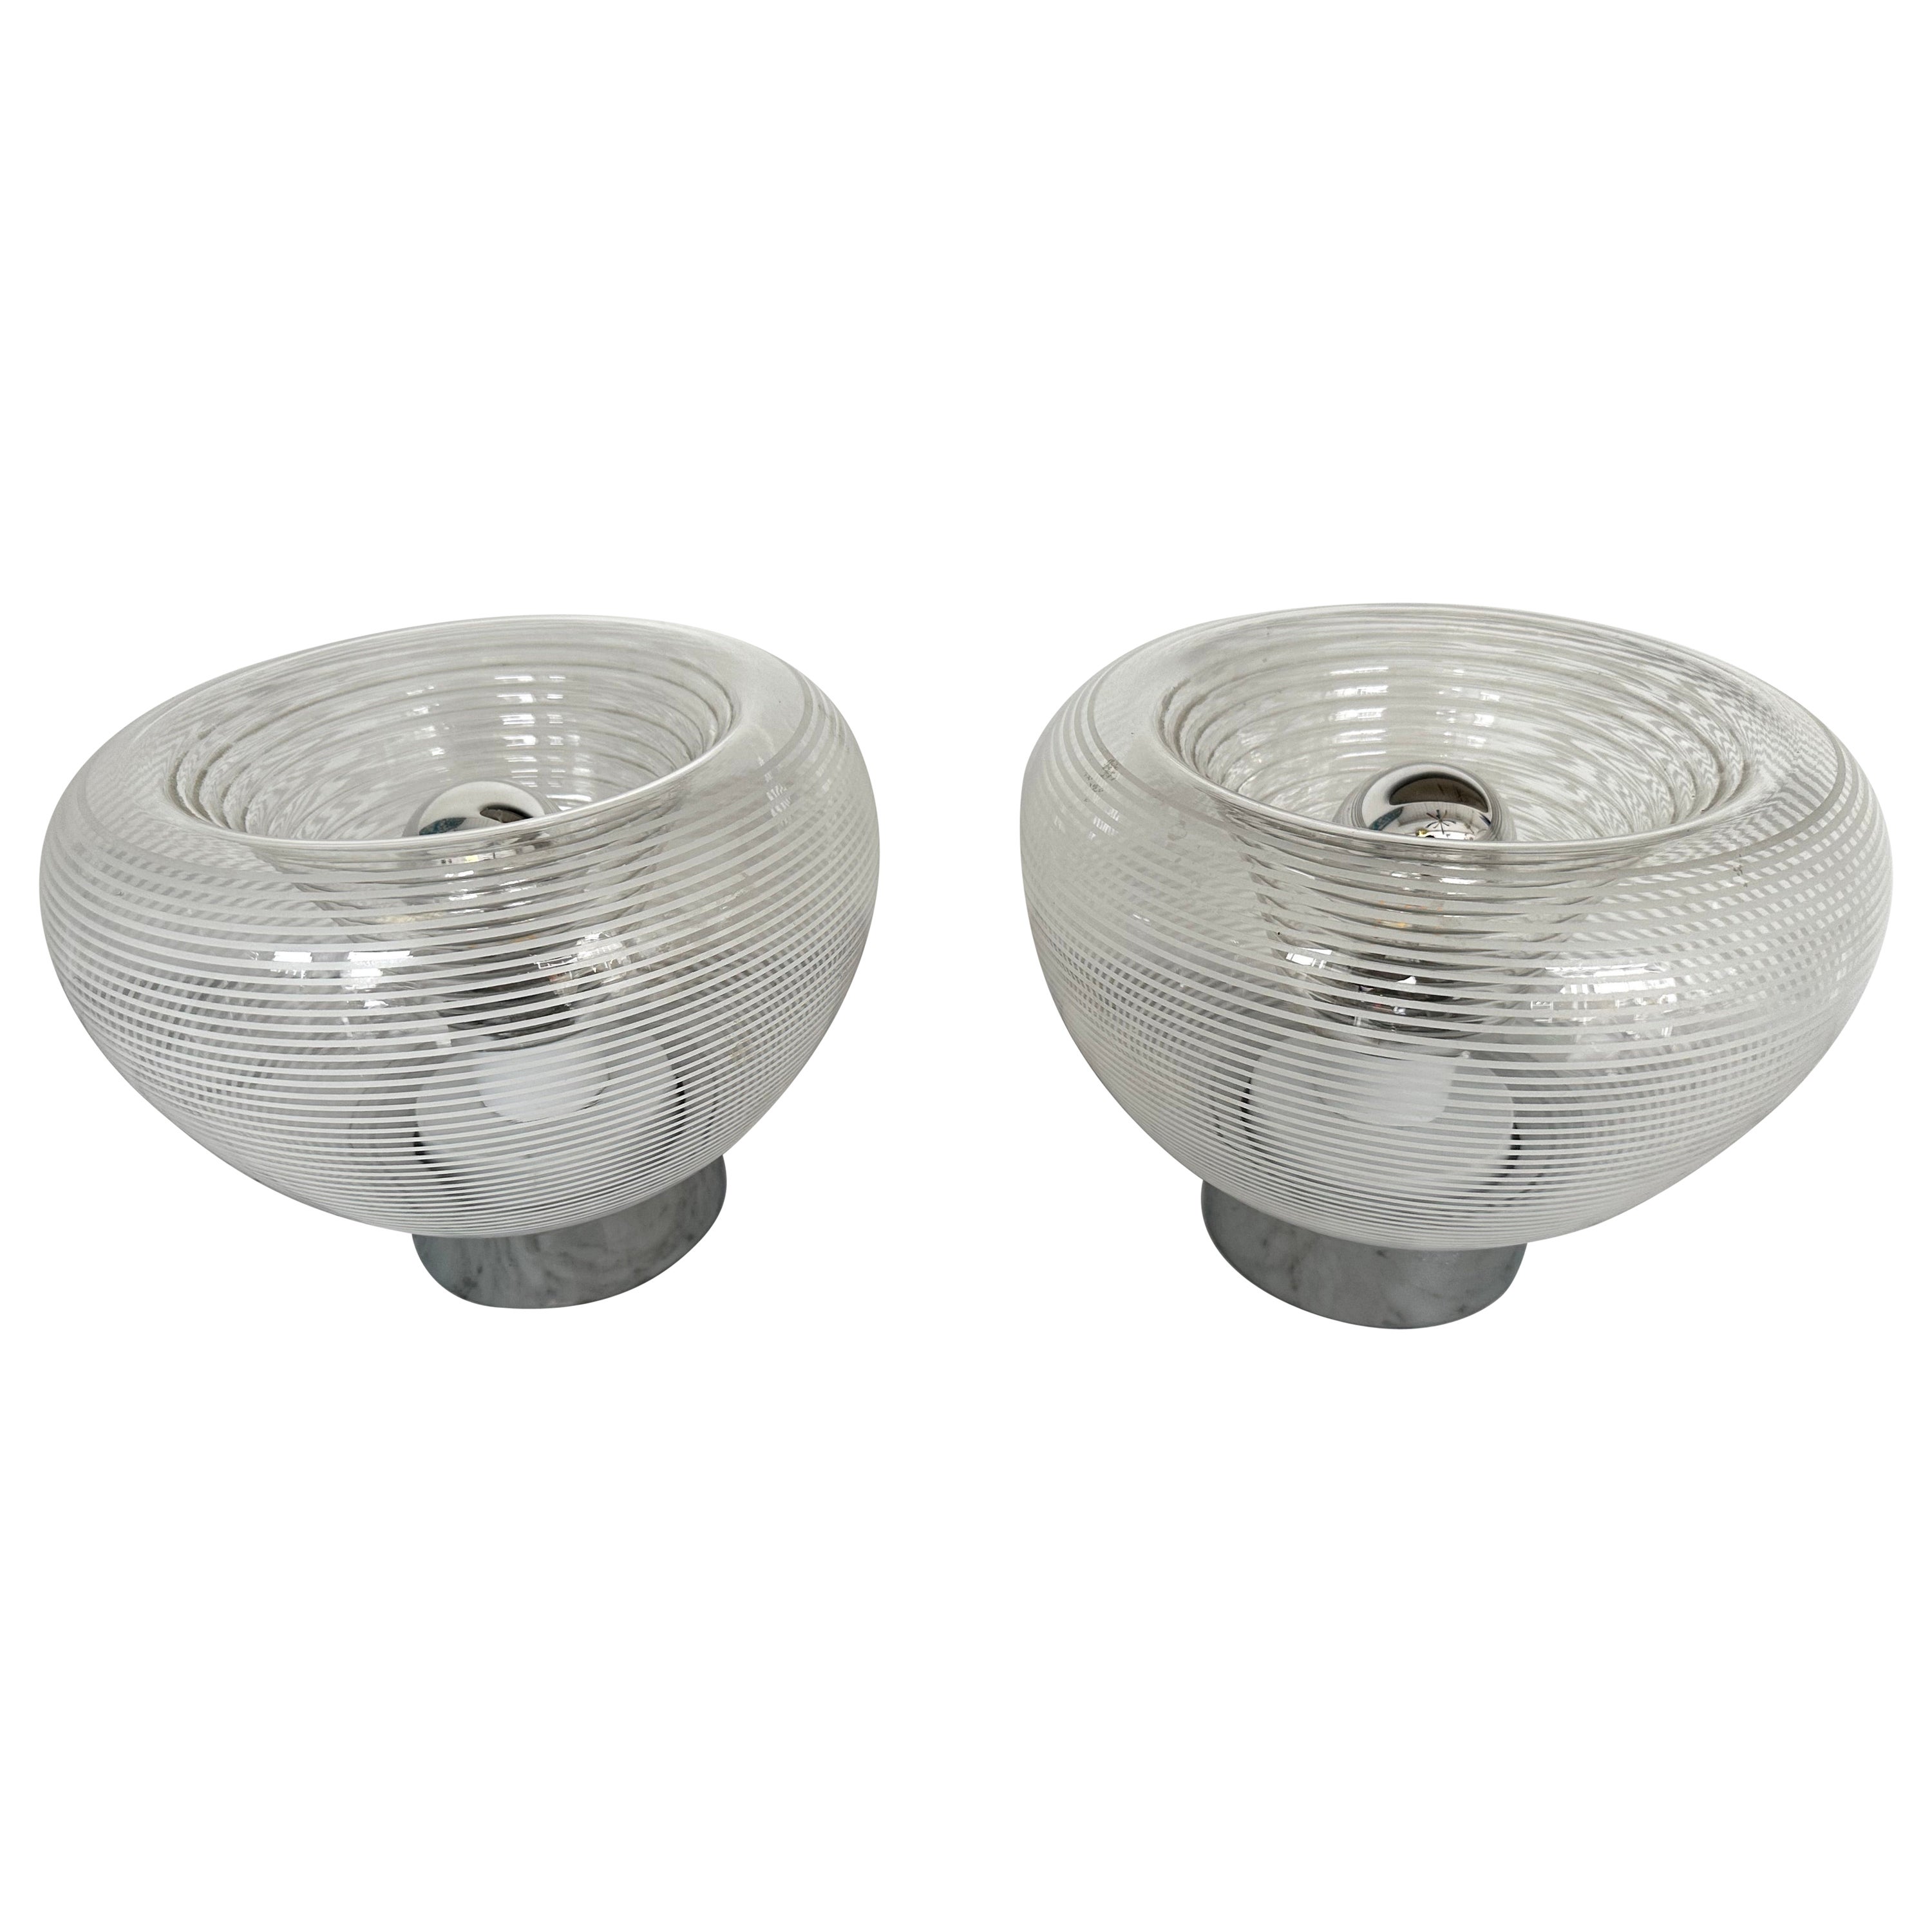 Pair of Stripe Murano Glass and Metal Chrome Lamps by VeArt, Italy, 1970s For Sale